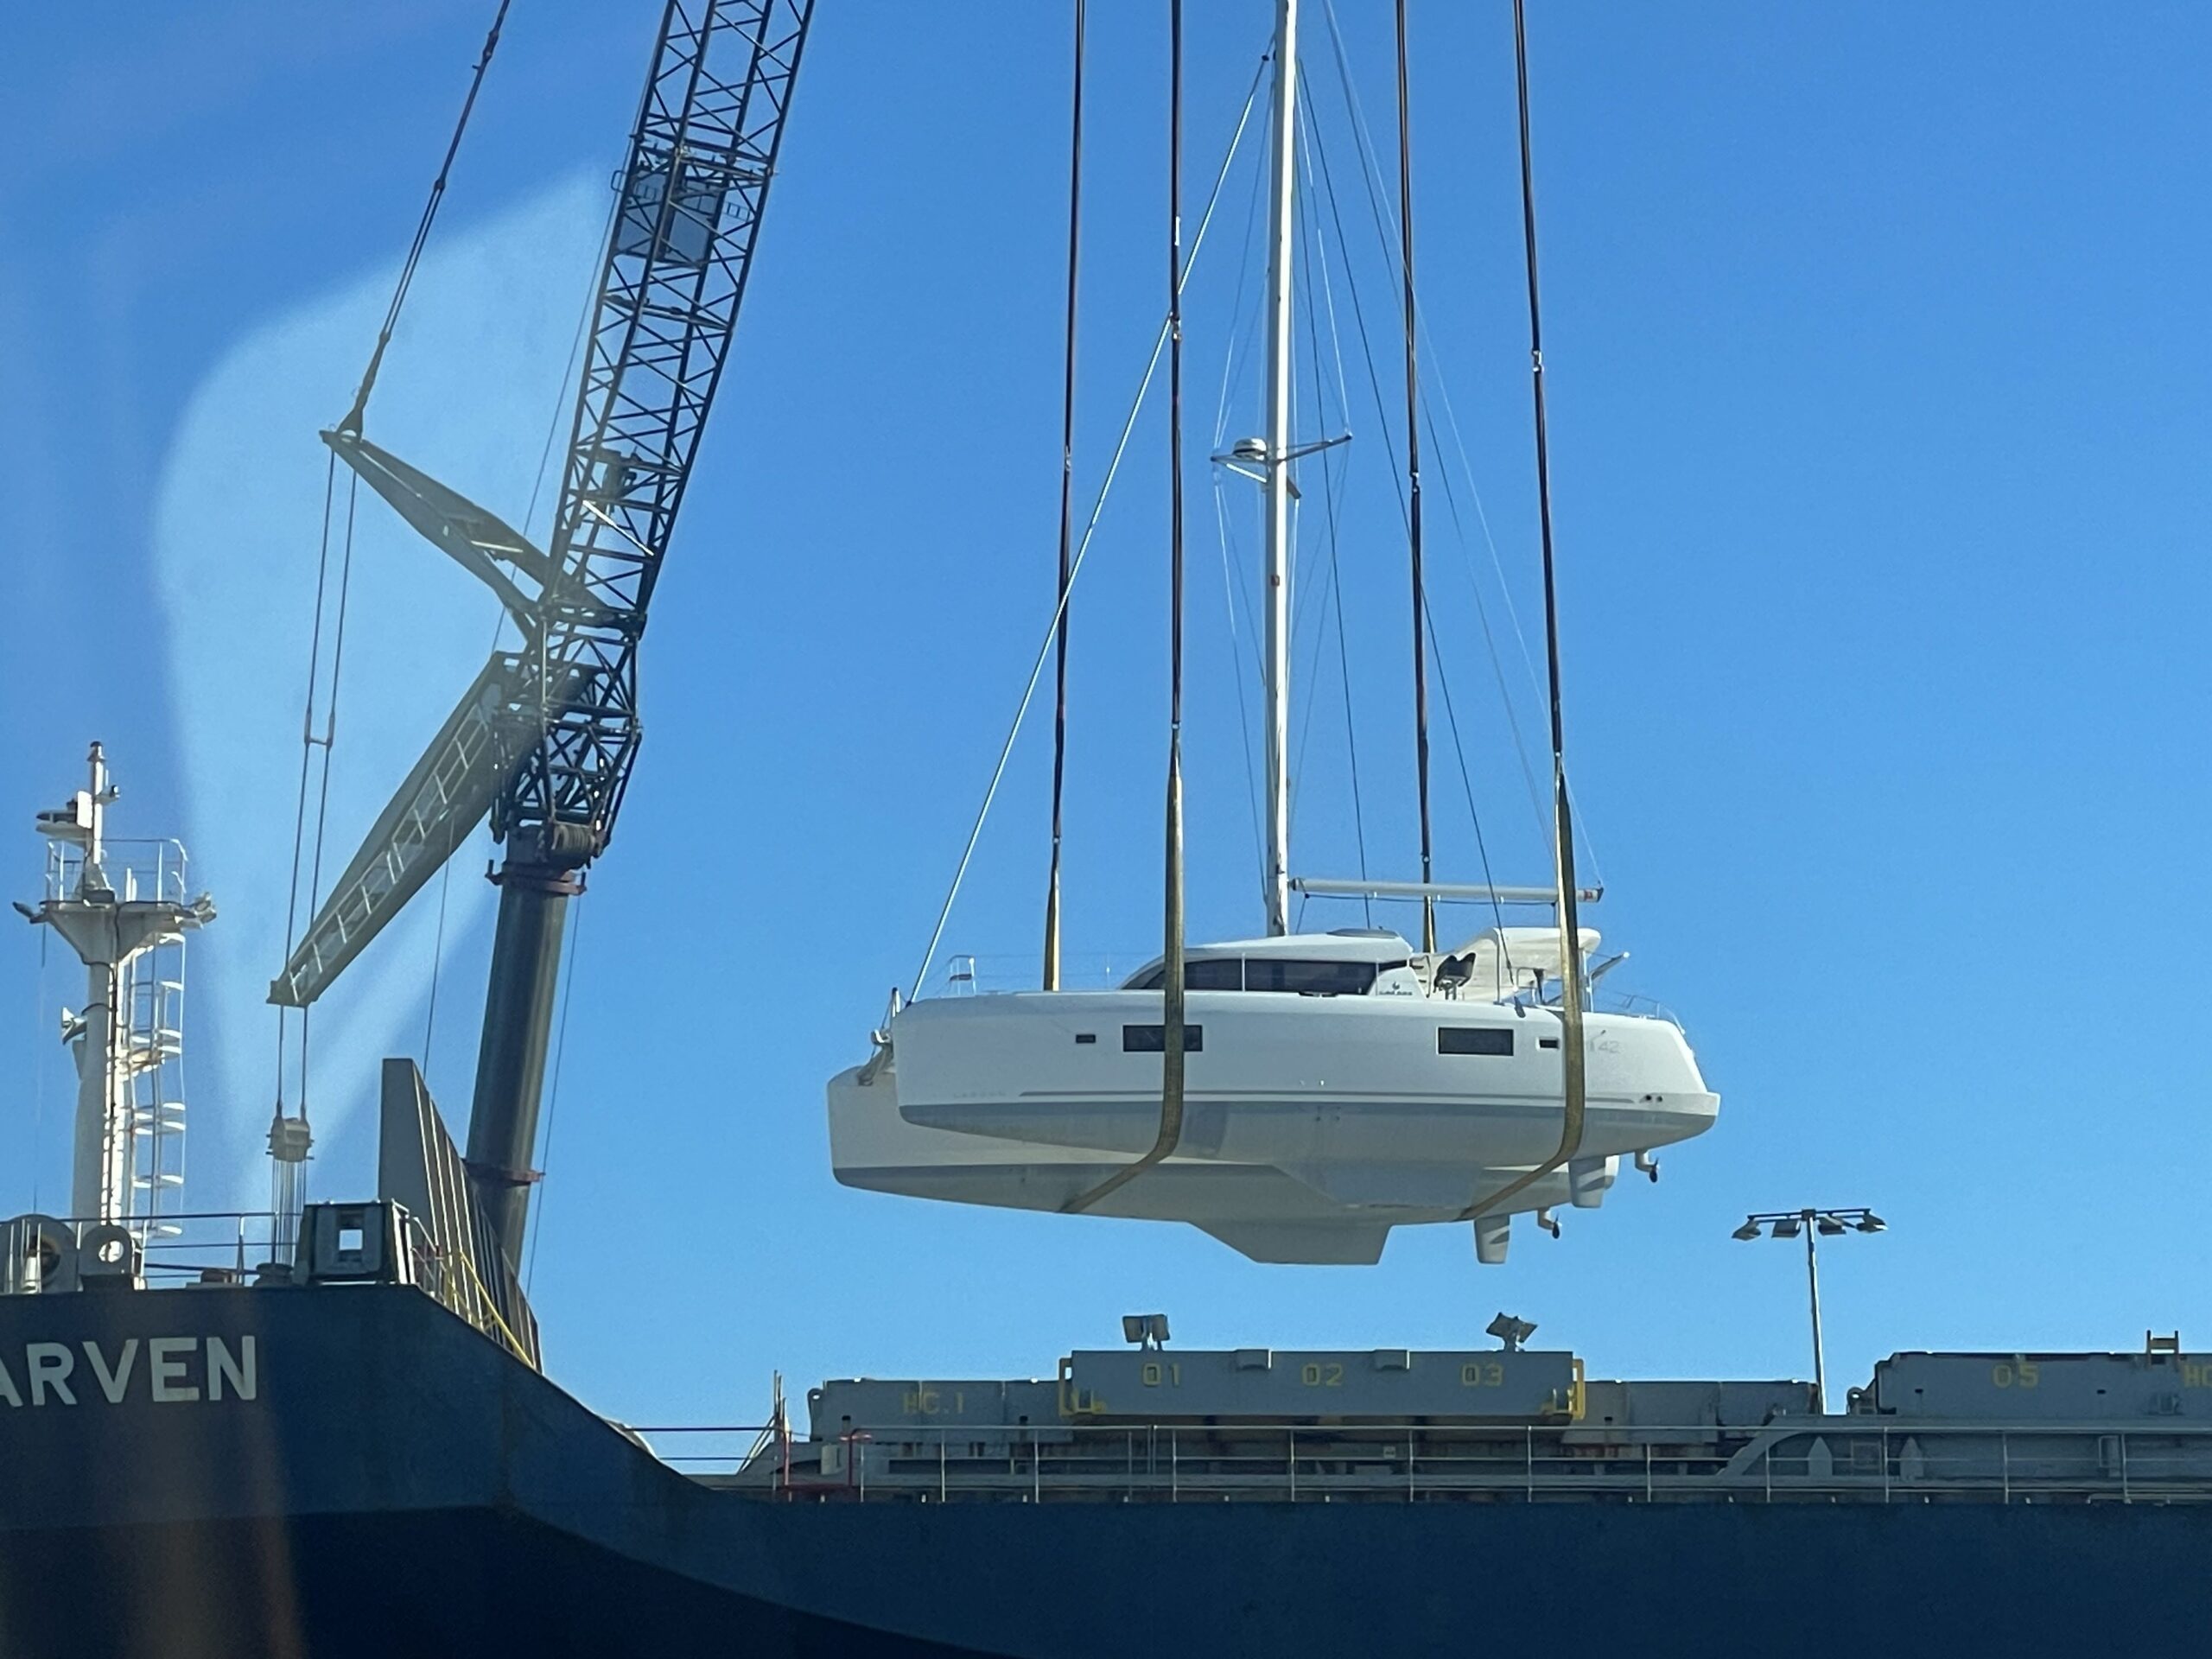 Lagoon being offloaded on hoists